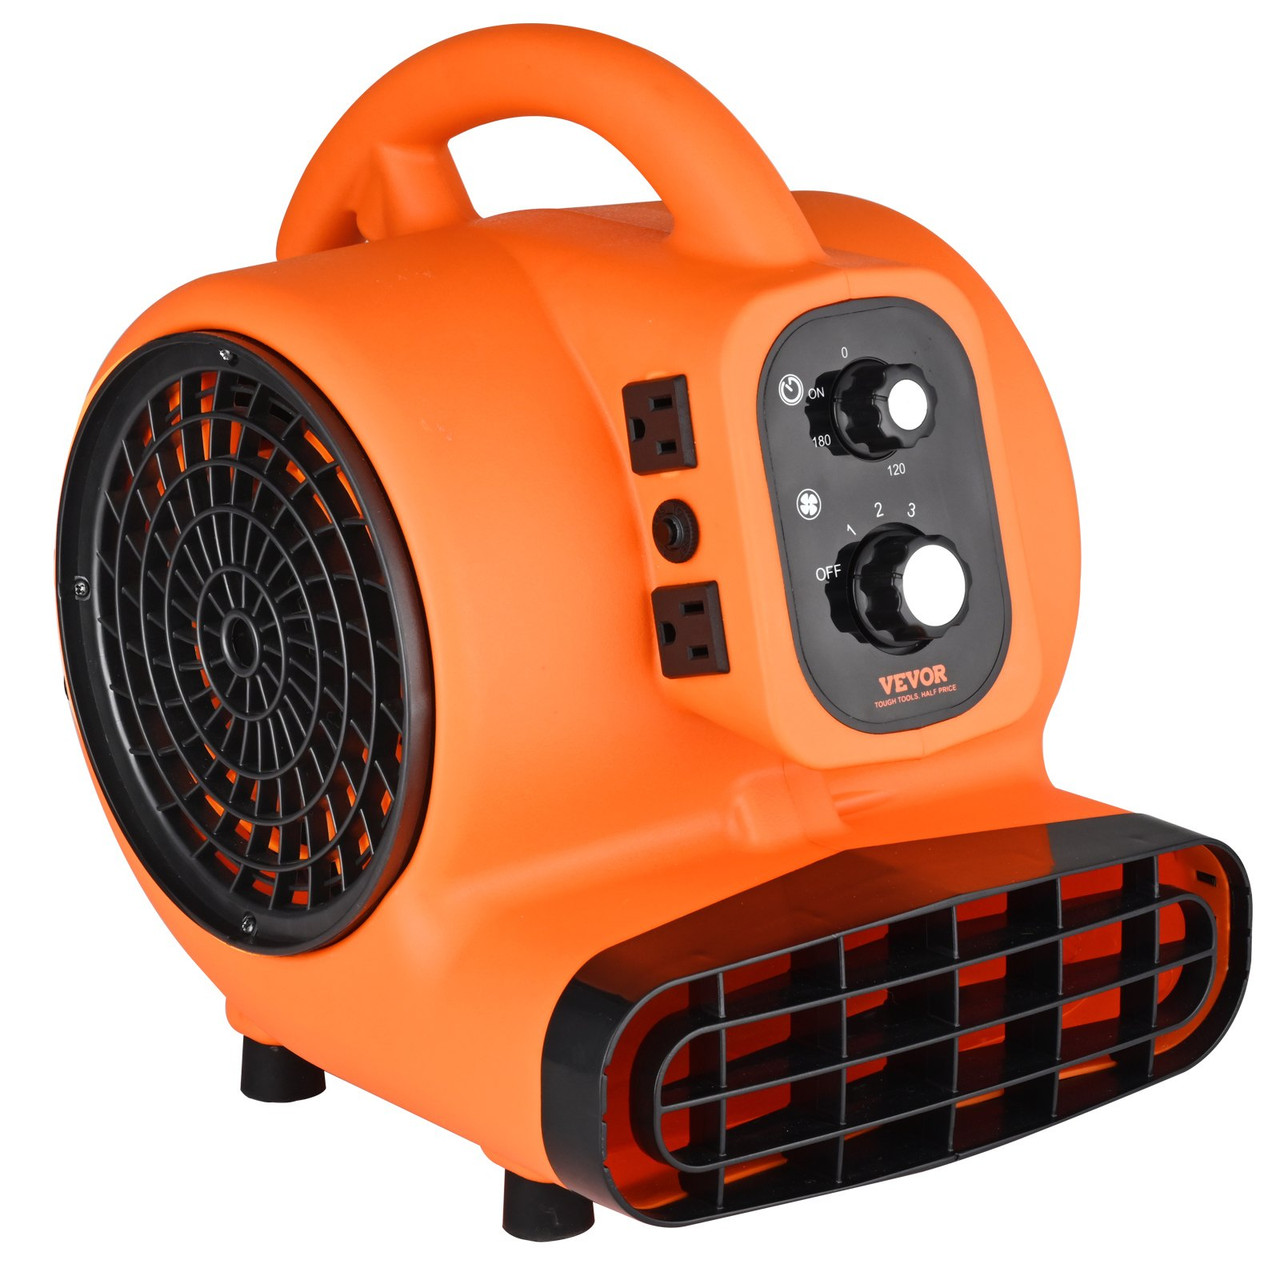 Floor Blower, 1/4 HP, 1000 CFM Air Mover for Drying and Cooling, Portable Carpet  Dryer